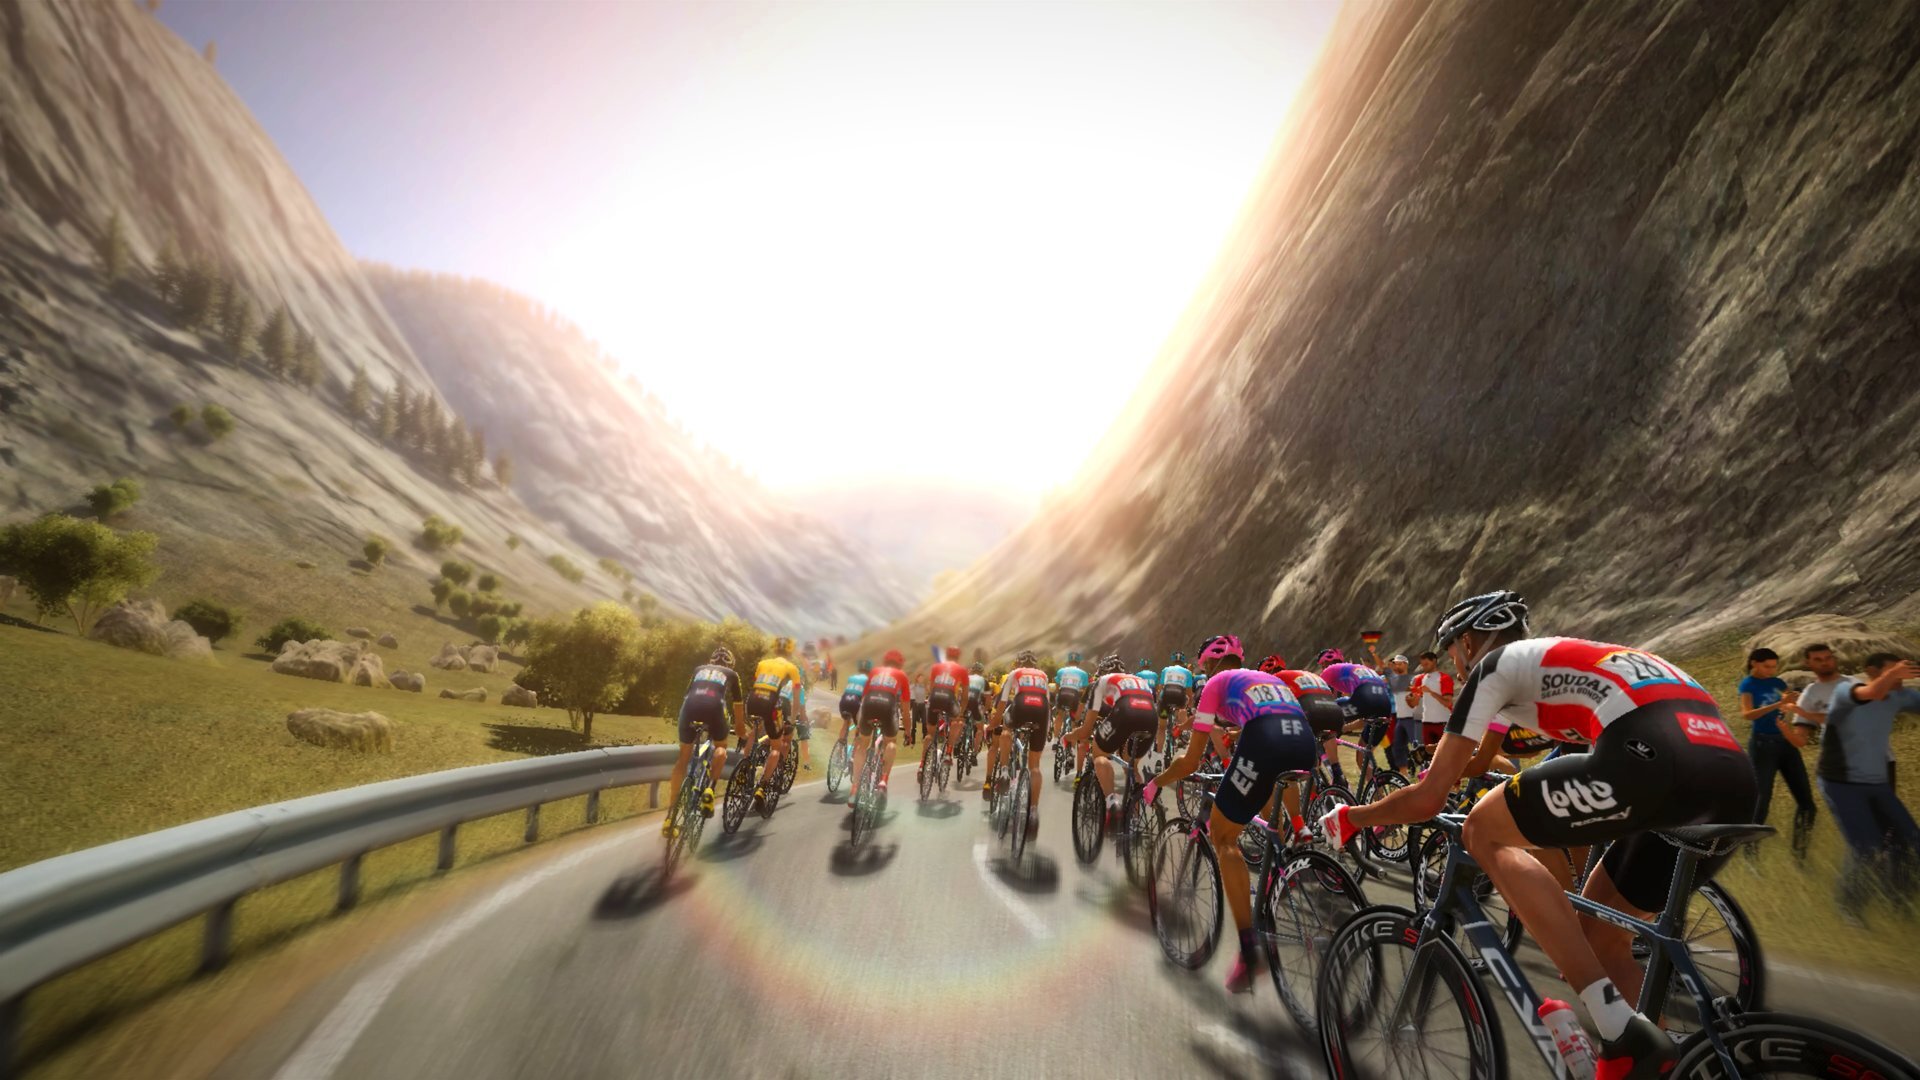 Pro Cycling Manager 2021 - Operation Sports